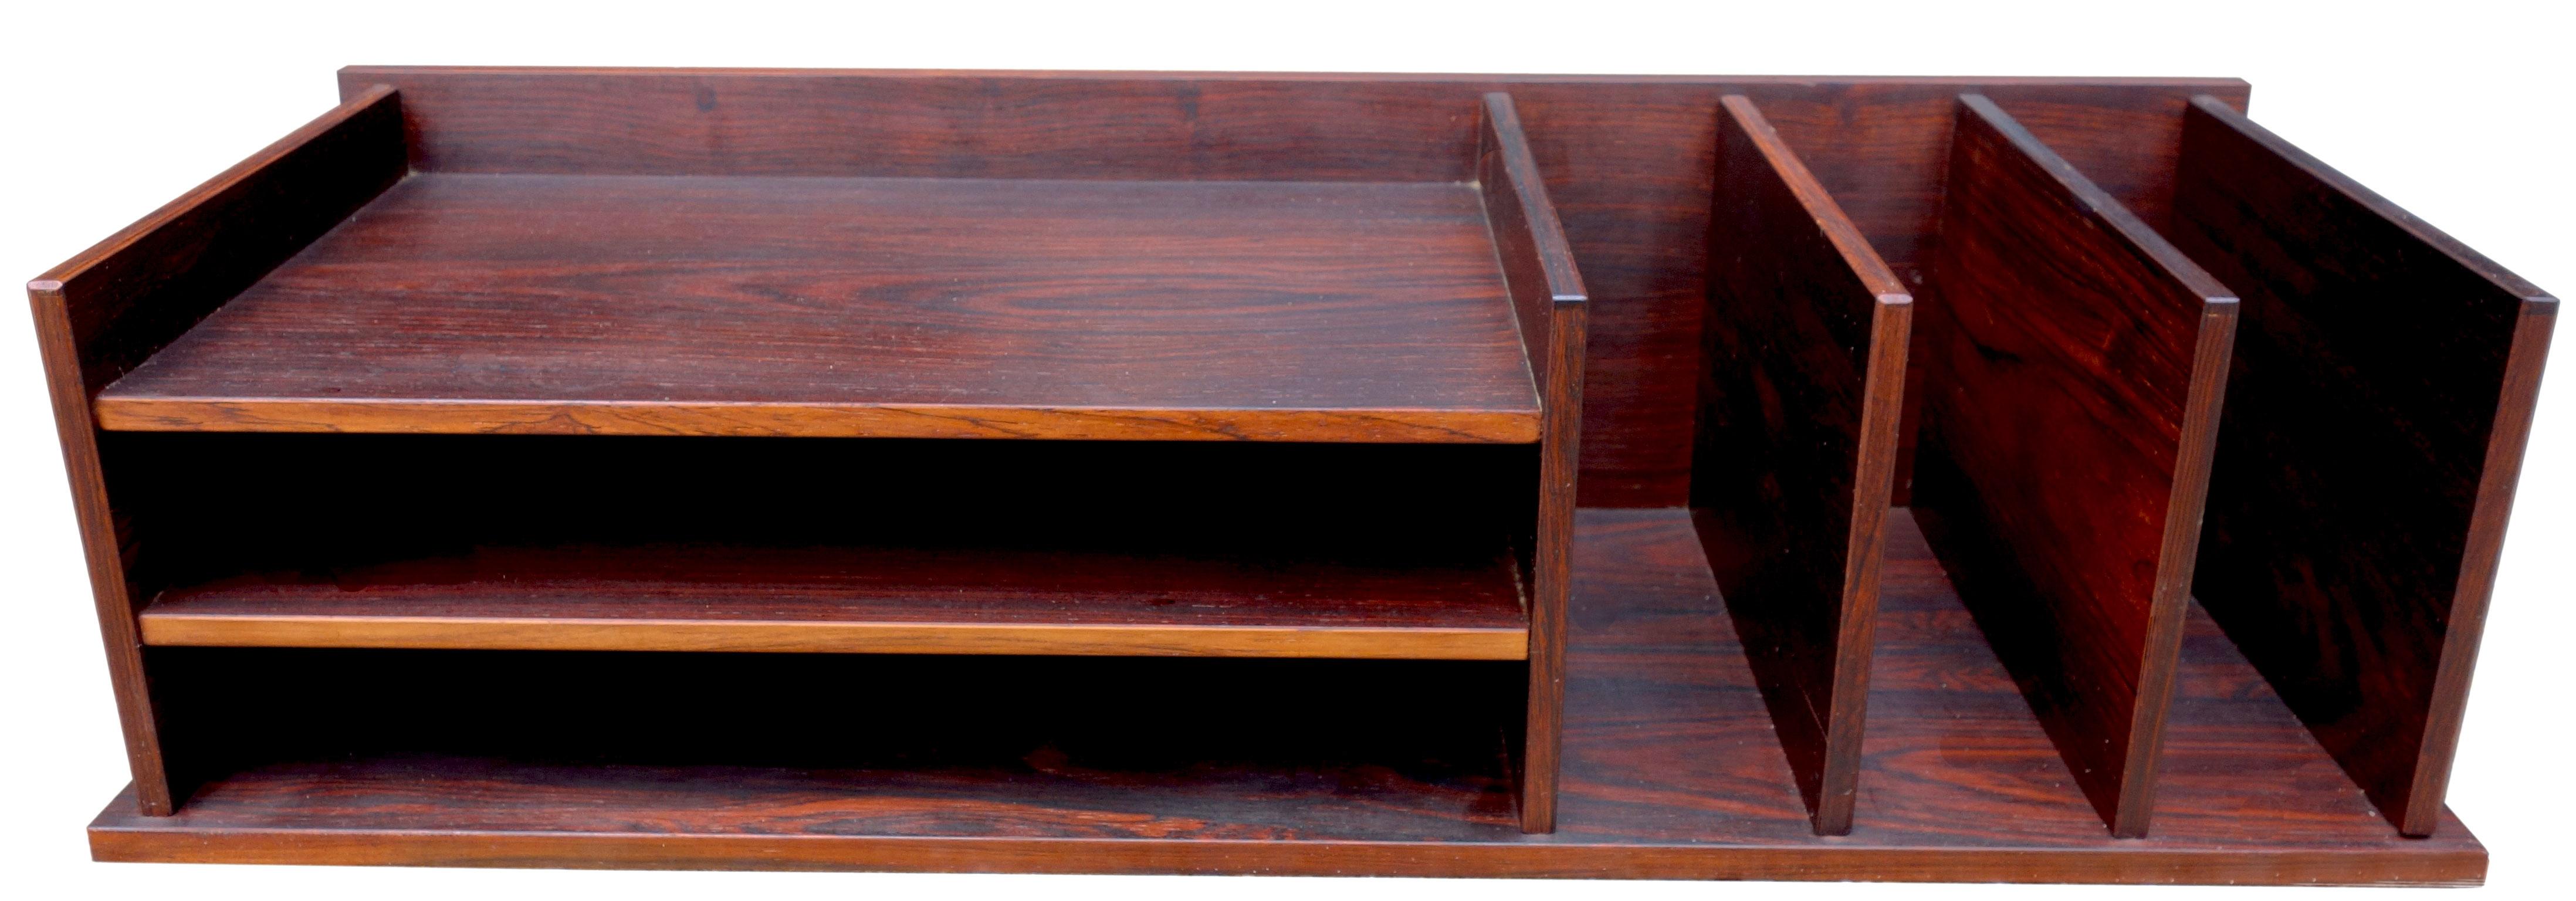 20th Century Midcentury Rosewood Desk Organizer / Letter Tray by Georg Petersens